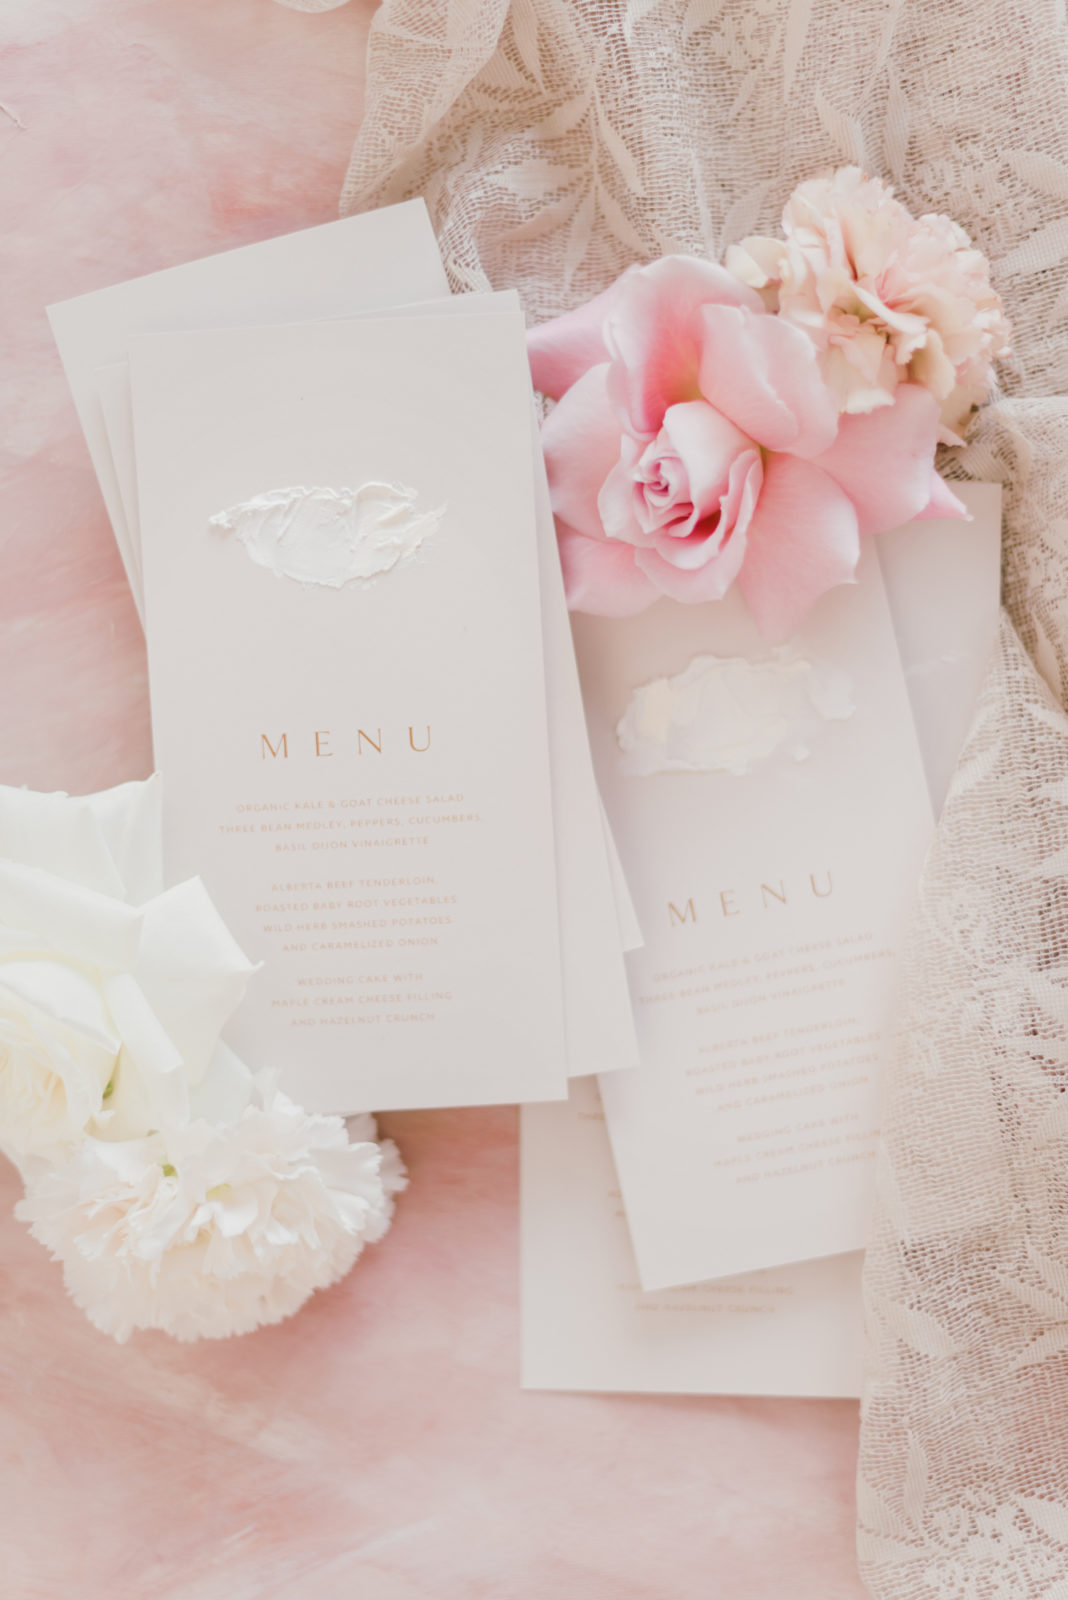 Pink and white wedding menu inspiration for a romantic and feminine wedding style